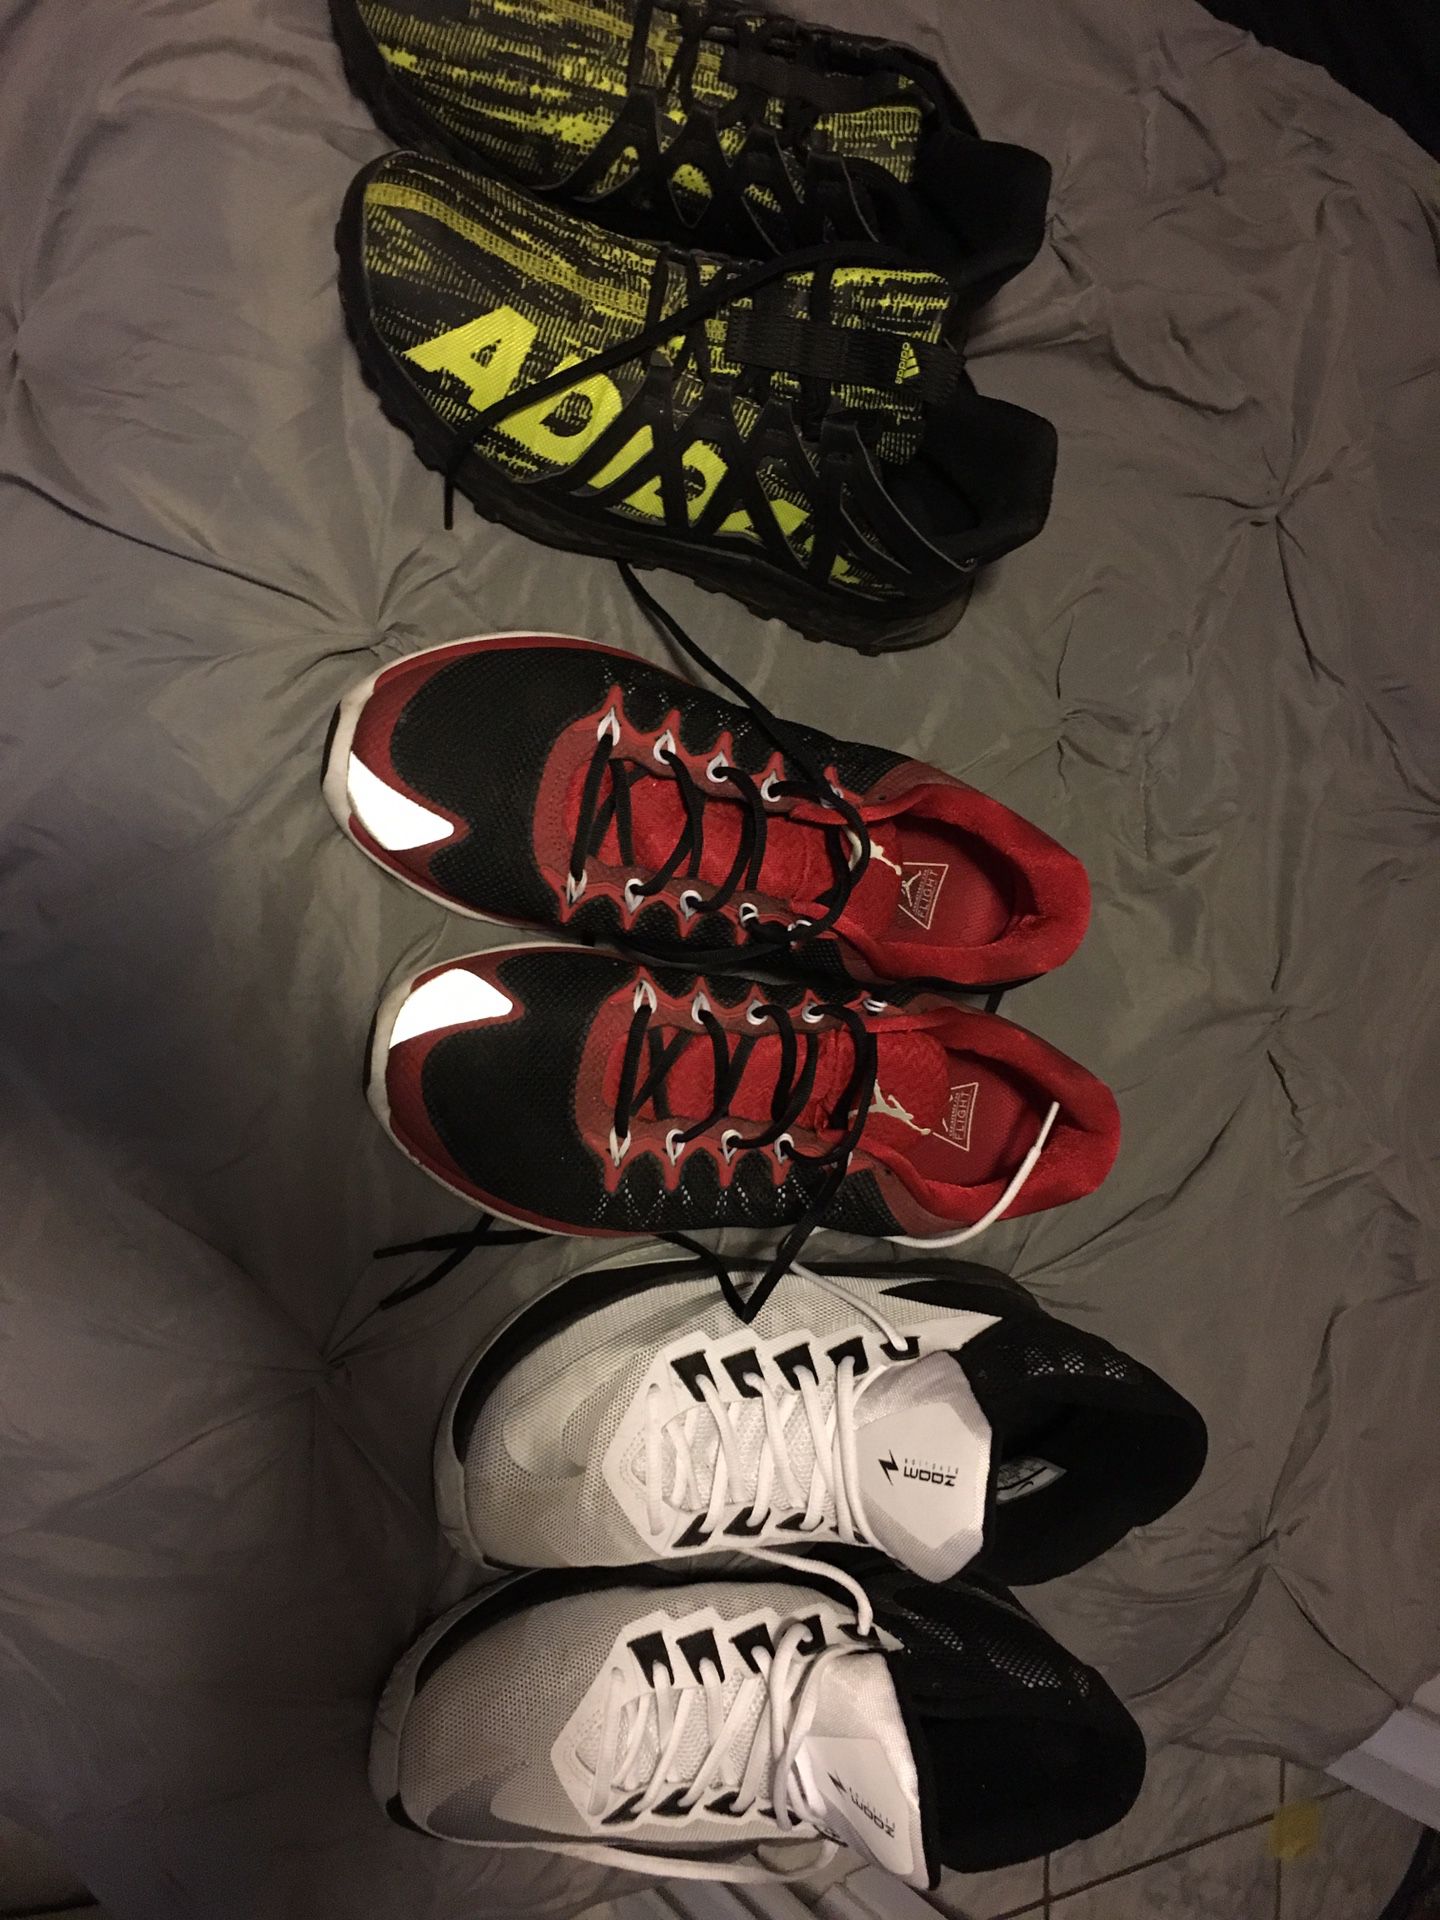 Three pairs excellent condition